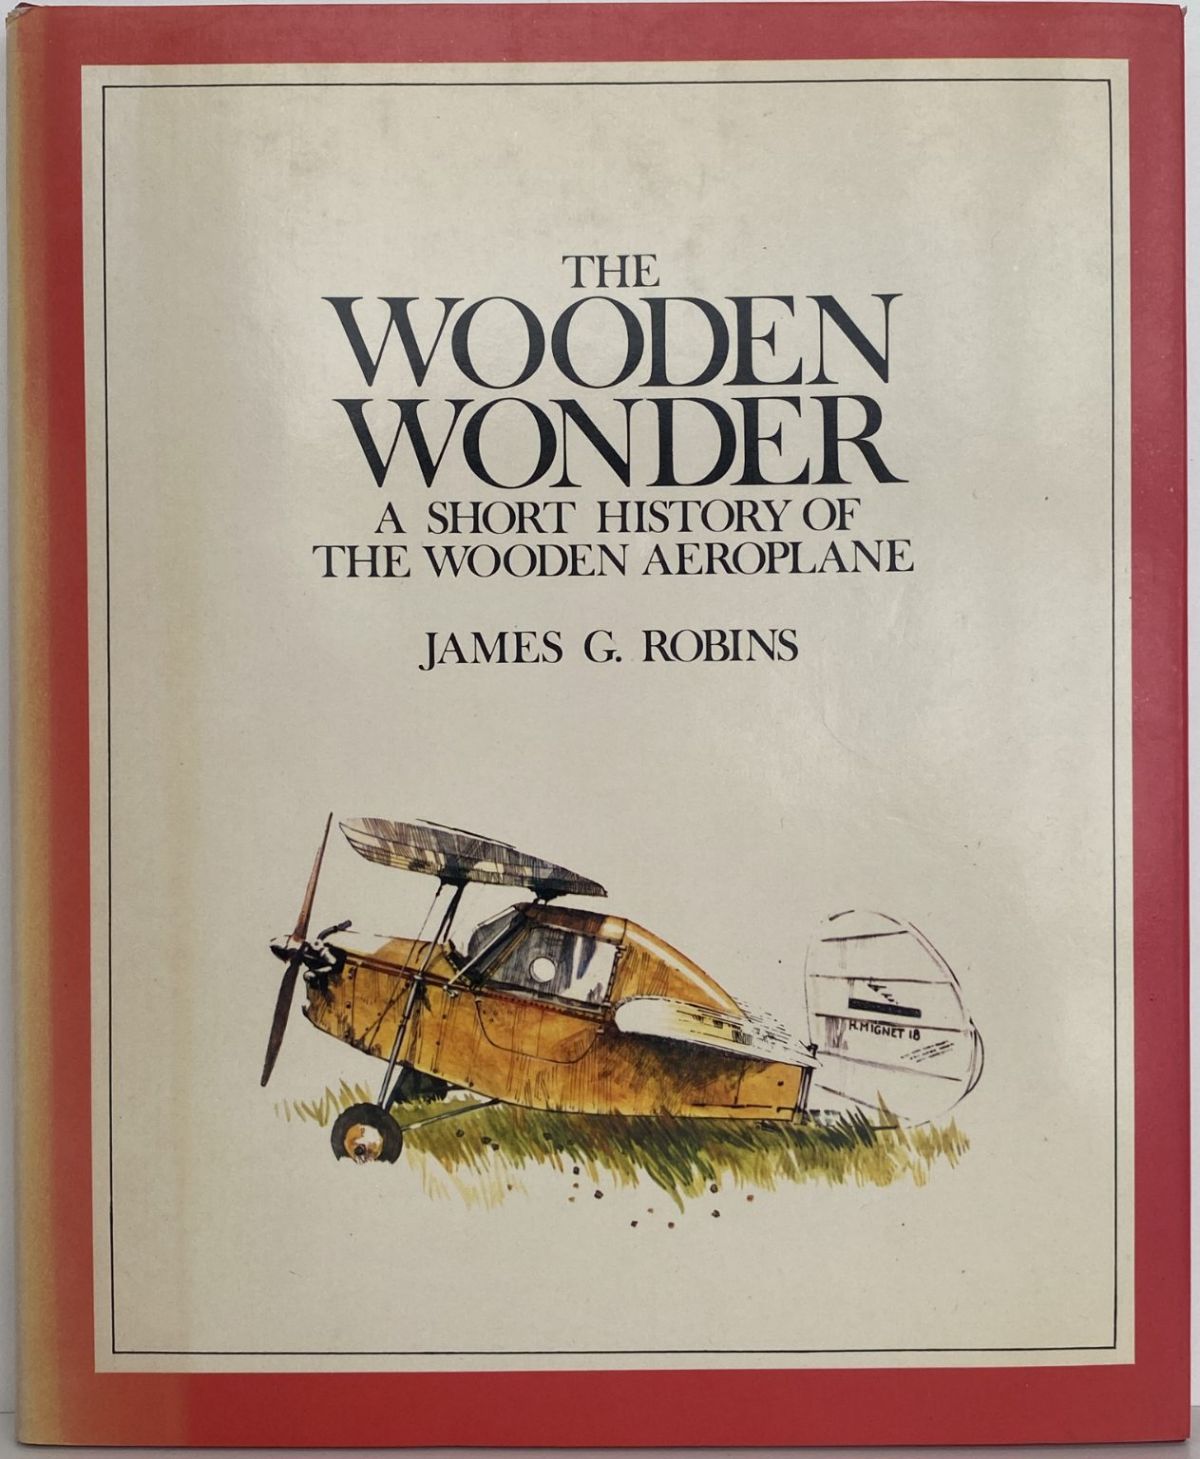 THE WOODEN WONDER: A short history of the wooden aeroplane